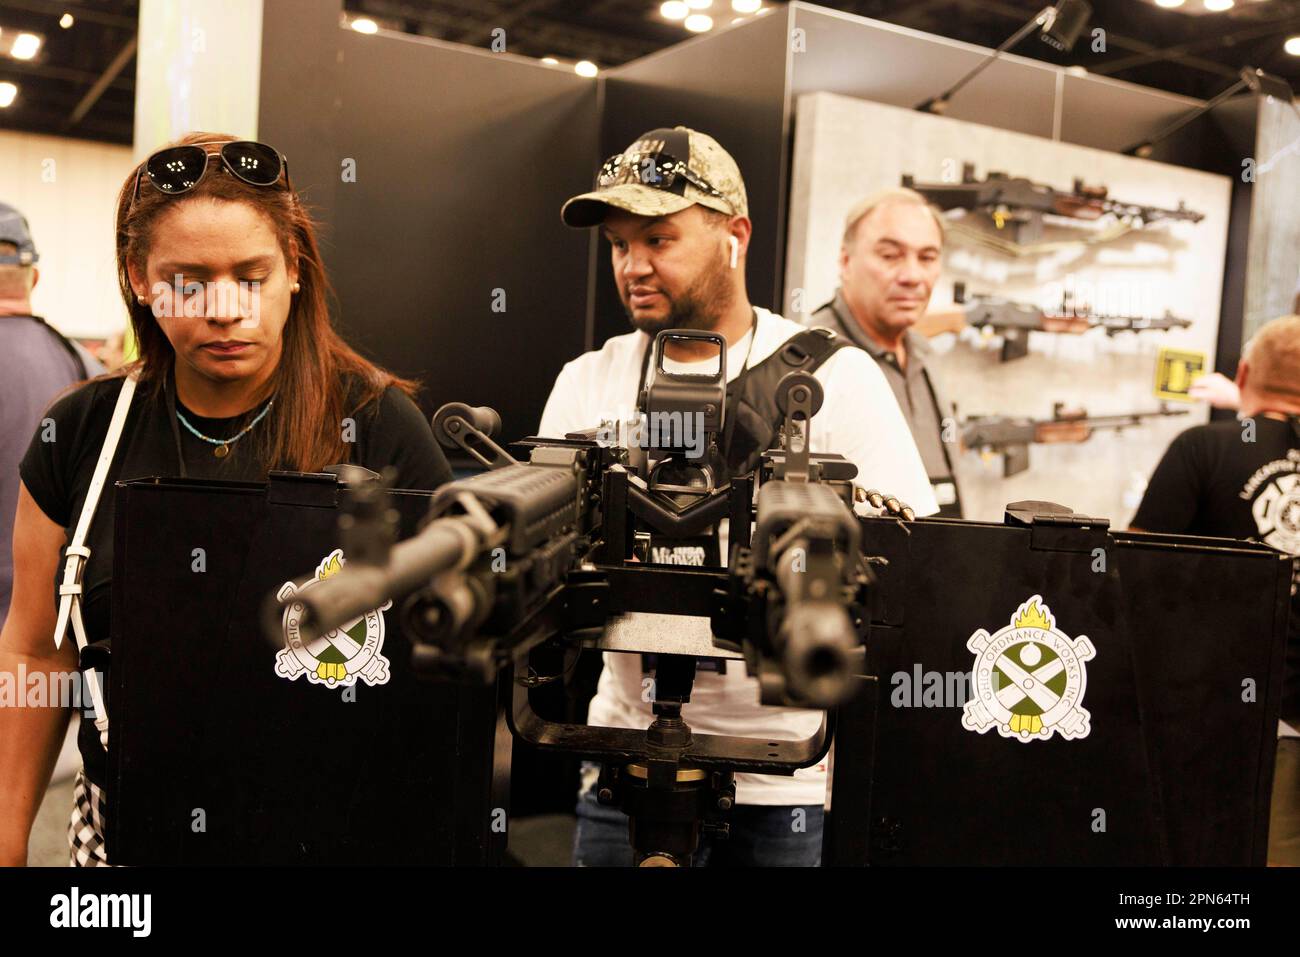 INDIANAPOLIS, INDIANA - APRIL 15: Guests look at a machine gun at the at the Ohio Ordnance Works Inc., booth during the National Rifle Association's Annual Meetings & Exhibits at the Indiana Convention Center on April 15, 2023 in Indianapolis, Indiana. The convention, which is expected to draw around 70,000 guests opened Friday. (Photo by Jeremy Hogan/The Bloomingtonian) Stock Photo